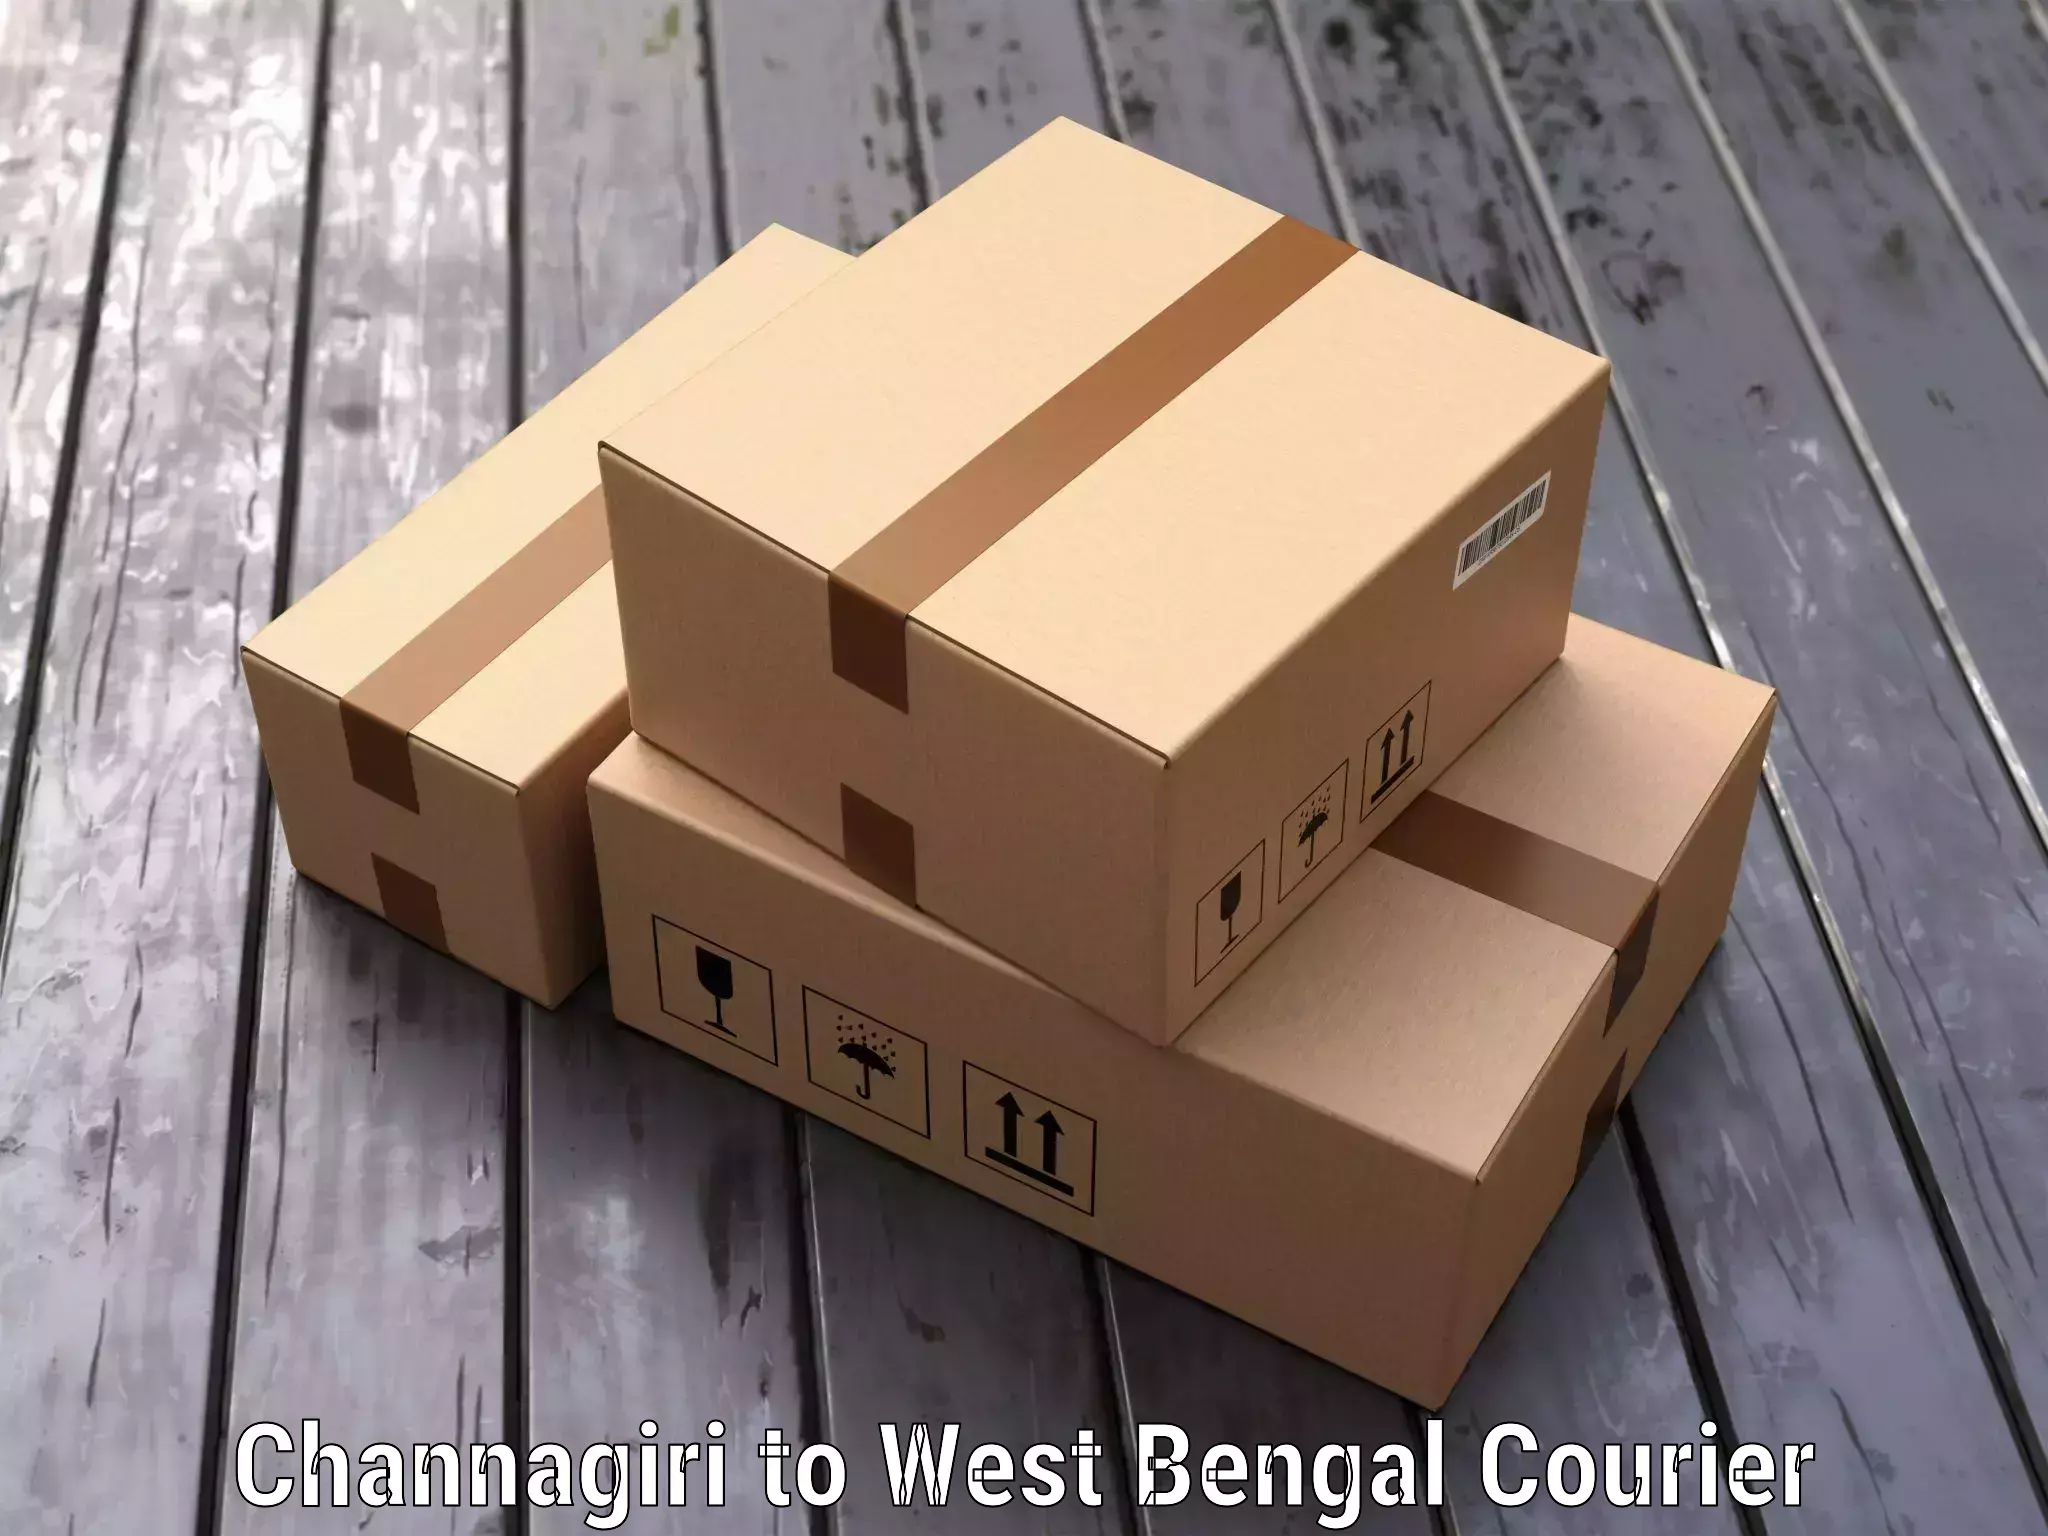 Baggage transport technology Channagiri to West Bengal